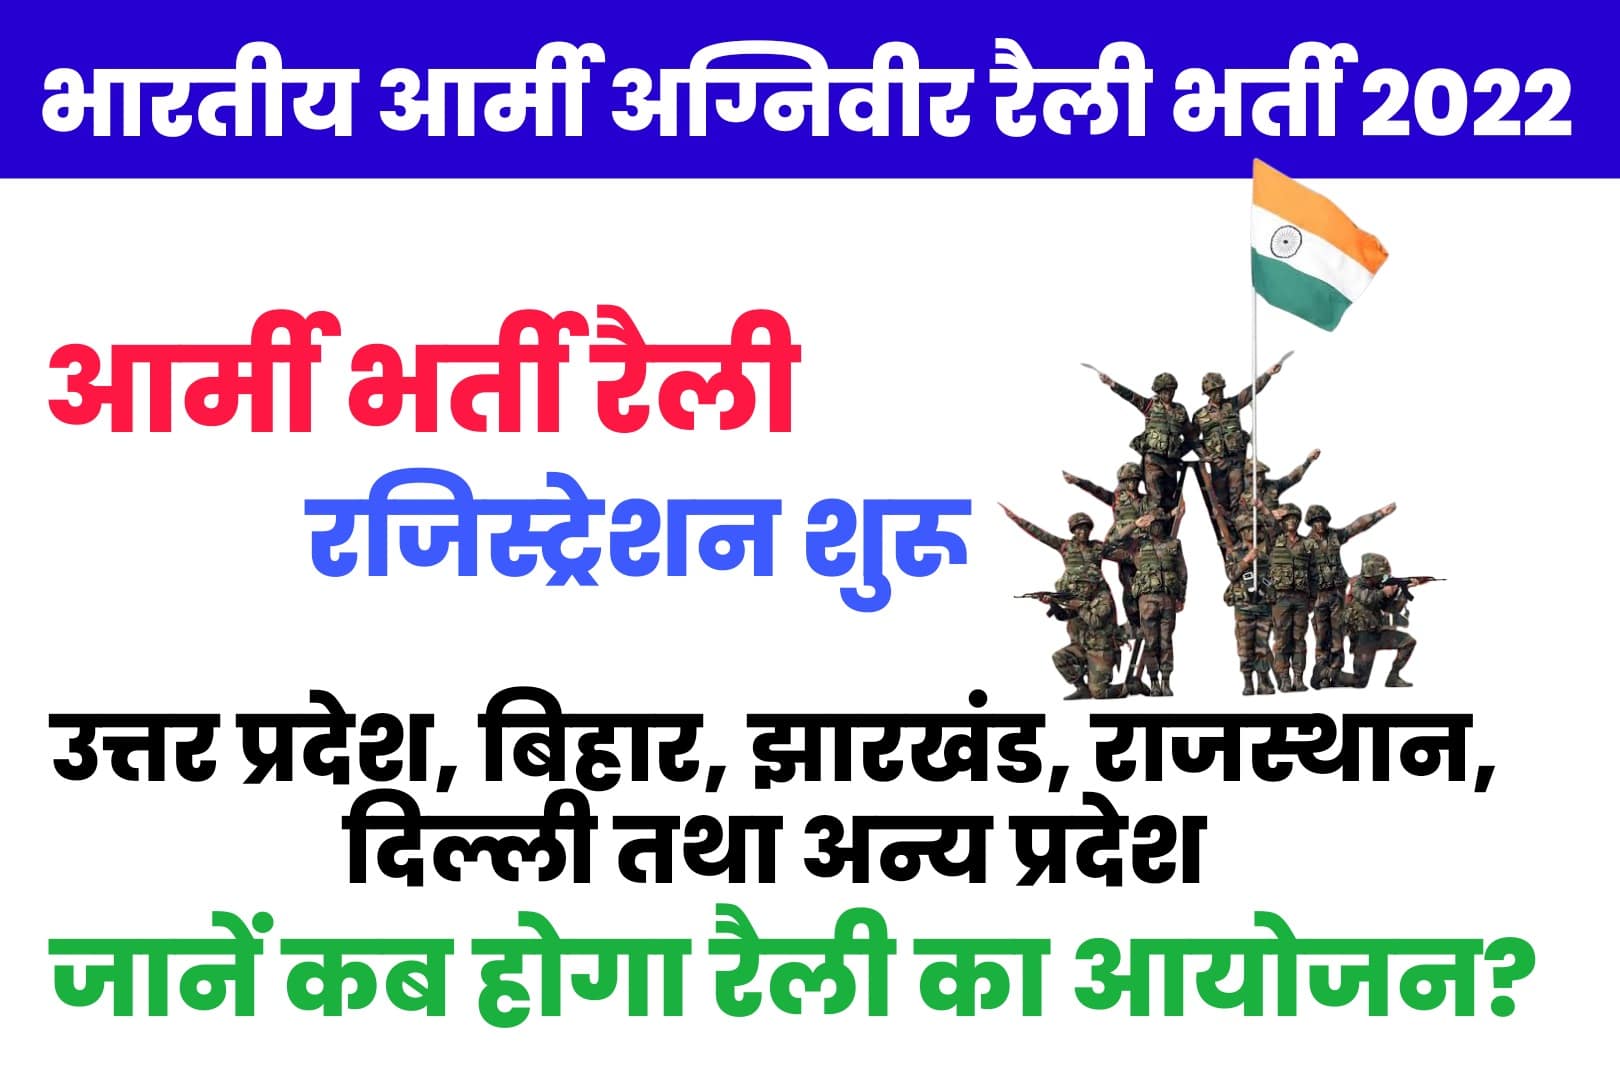 Indian Army Agniveer Rally Recruitment 2022